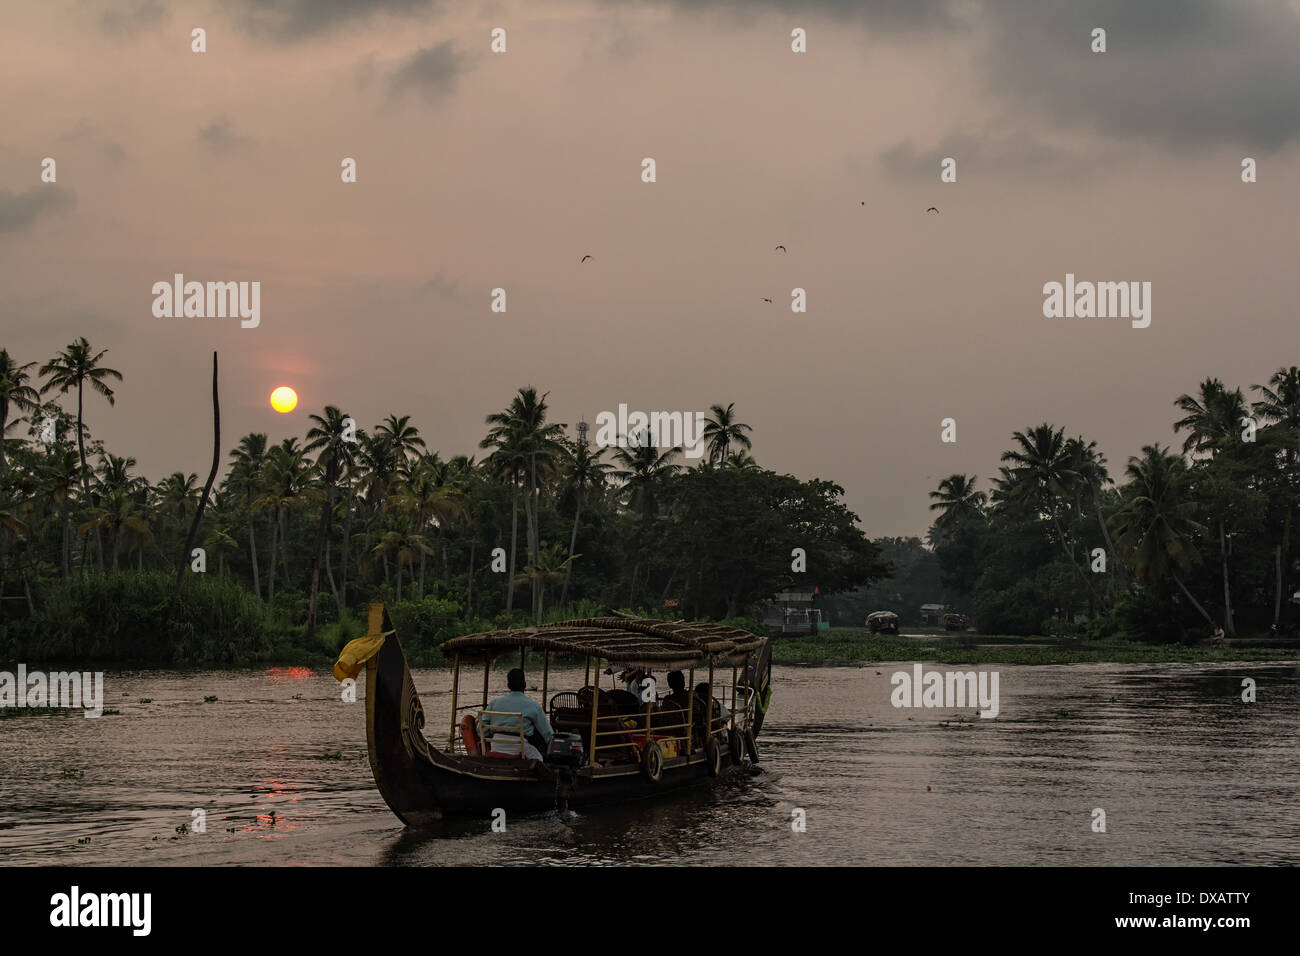 Riverboat carrying passengers on the river in the Alleppey Backwaters at sunset in Kerala, India Stock Photo